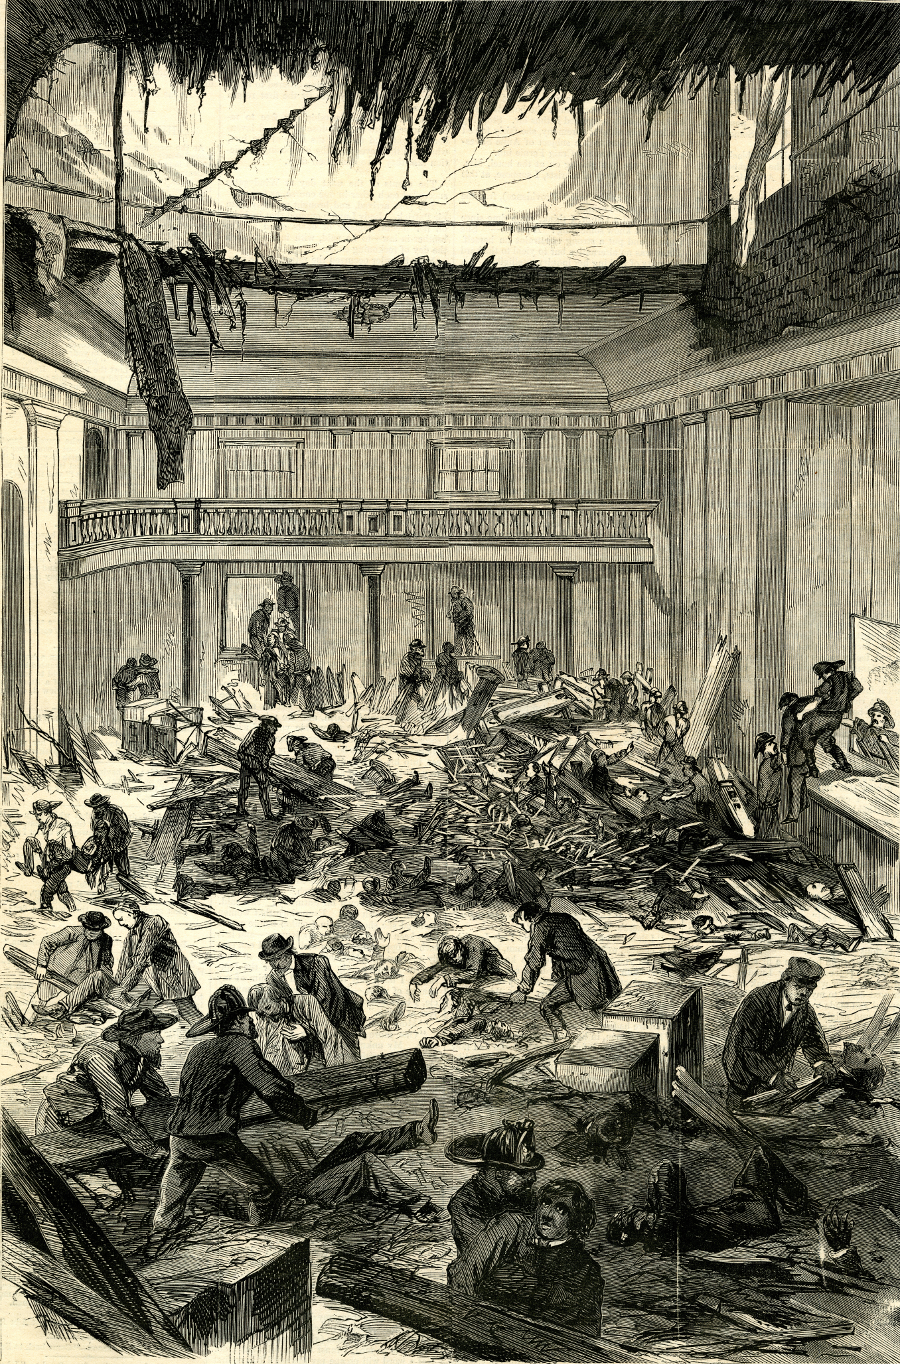 the collapse of the courtroom and gallery filled with observers of a court case in 1870 resulted in the Capitol Disaster, killing 62 and woundng about 200 people